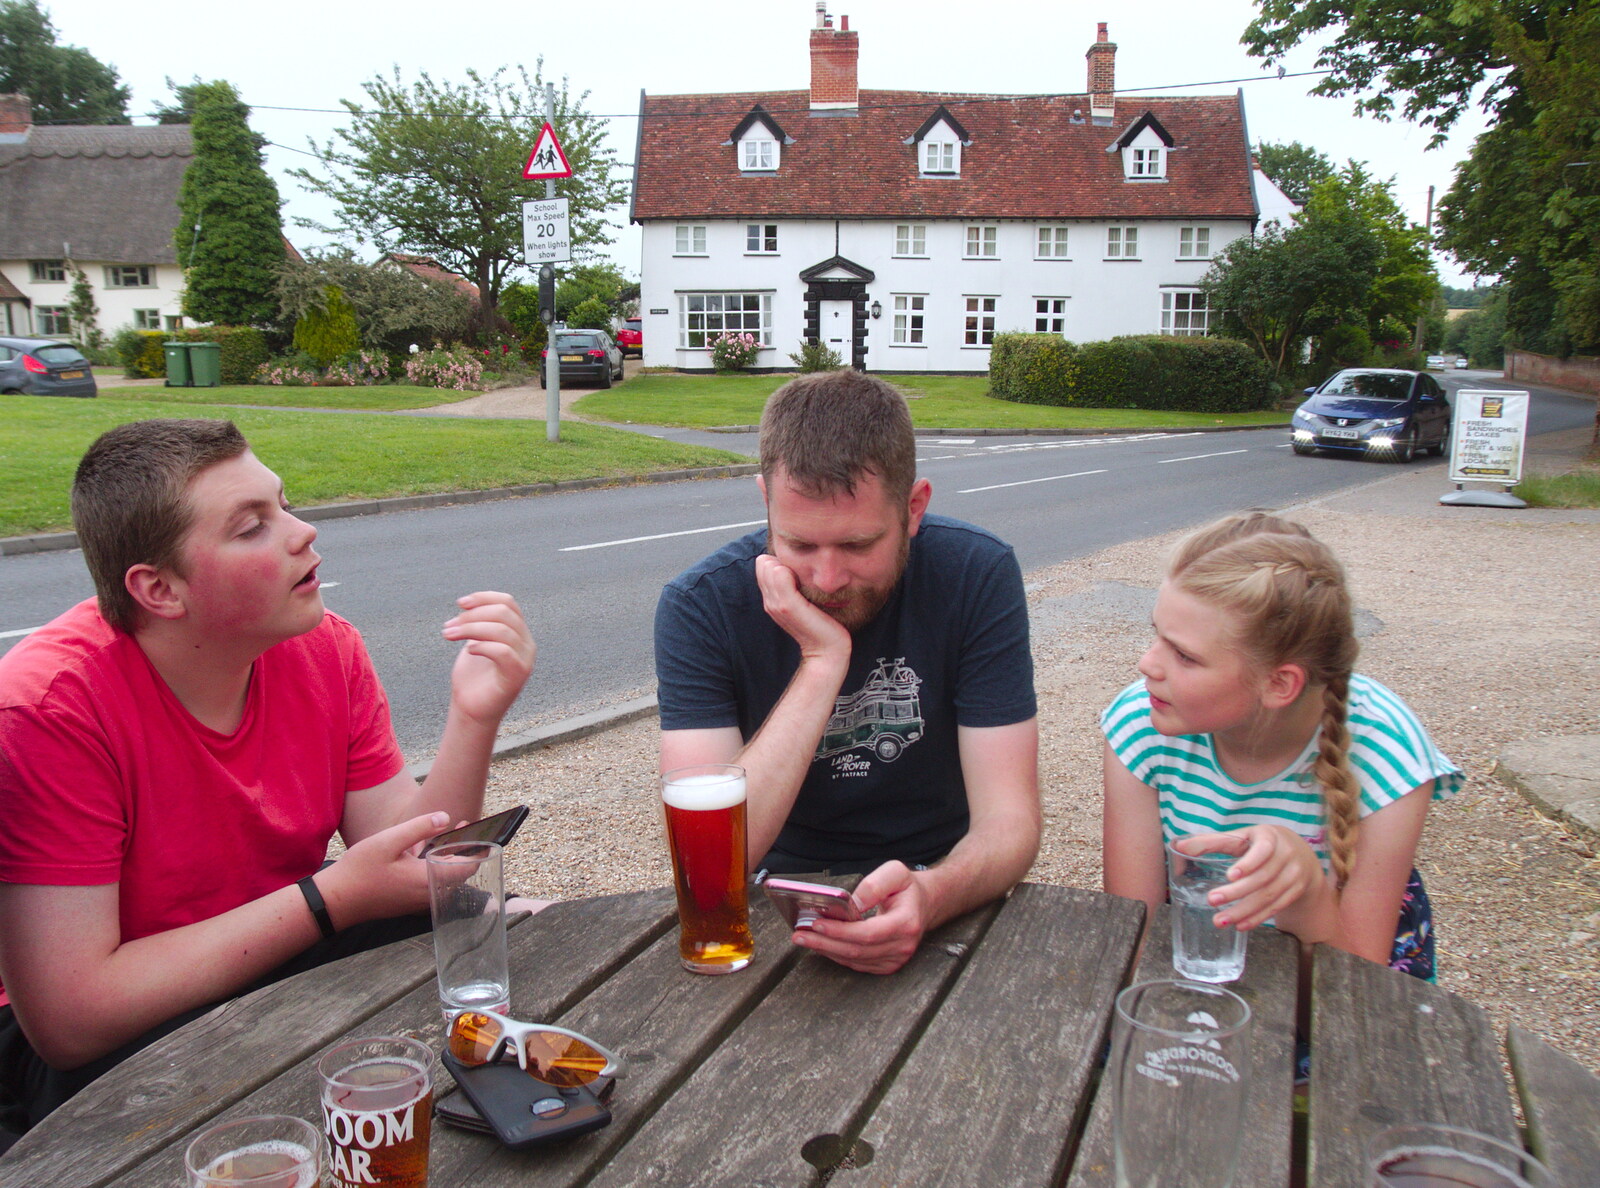 A Postcard from Boxford and BSCC at Pulham, Suffolk and Norfolk - 13th July 2019: The Boy Phil checks his phone outside the Crown